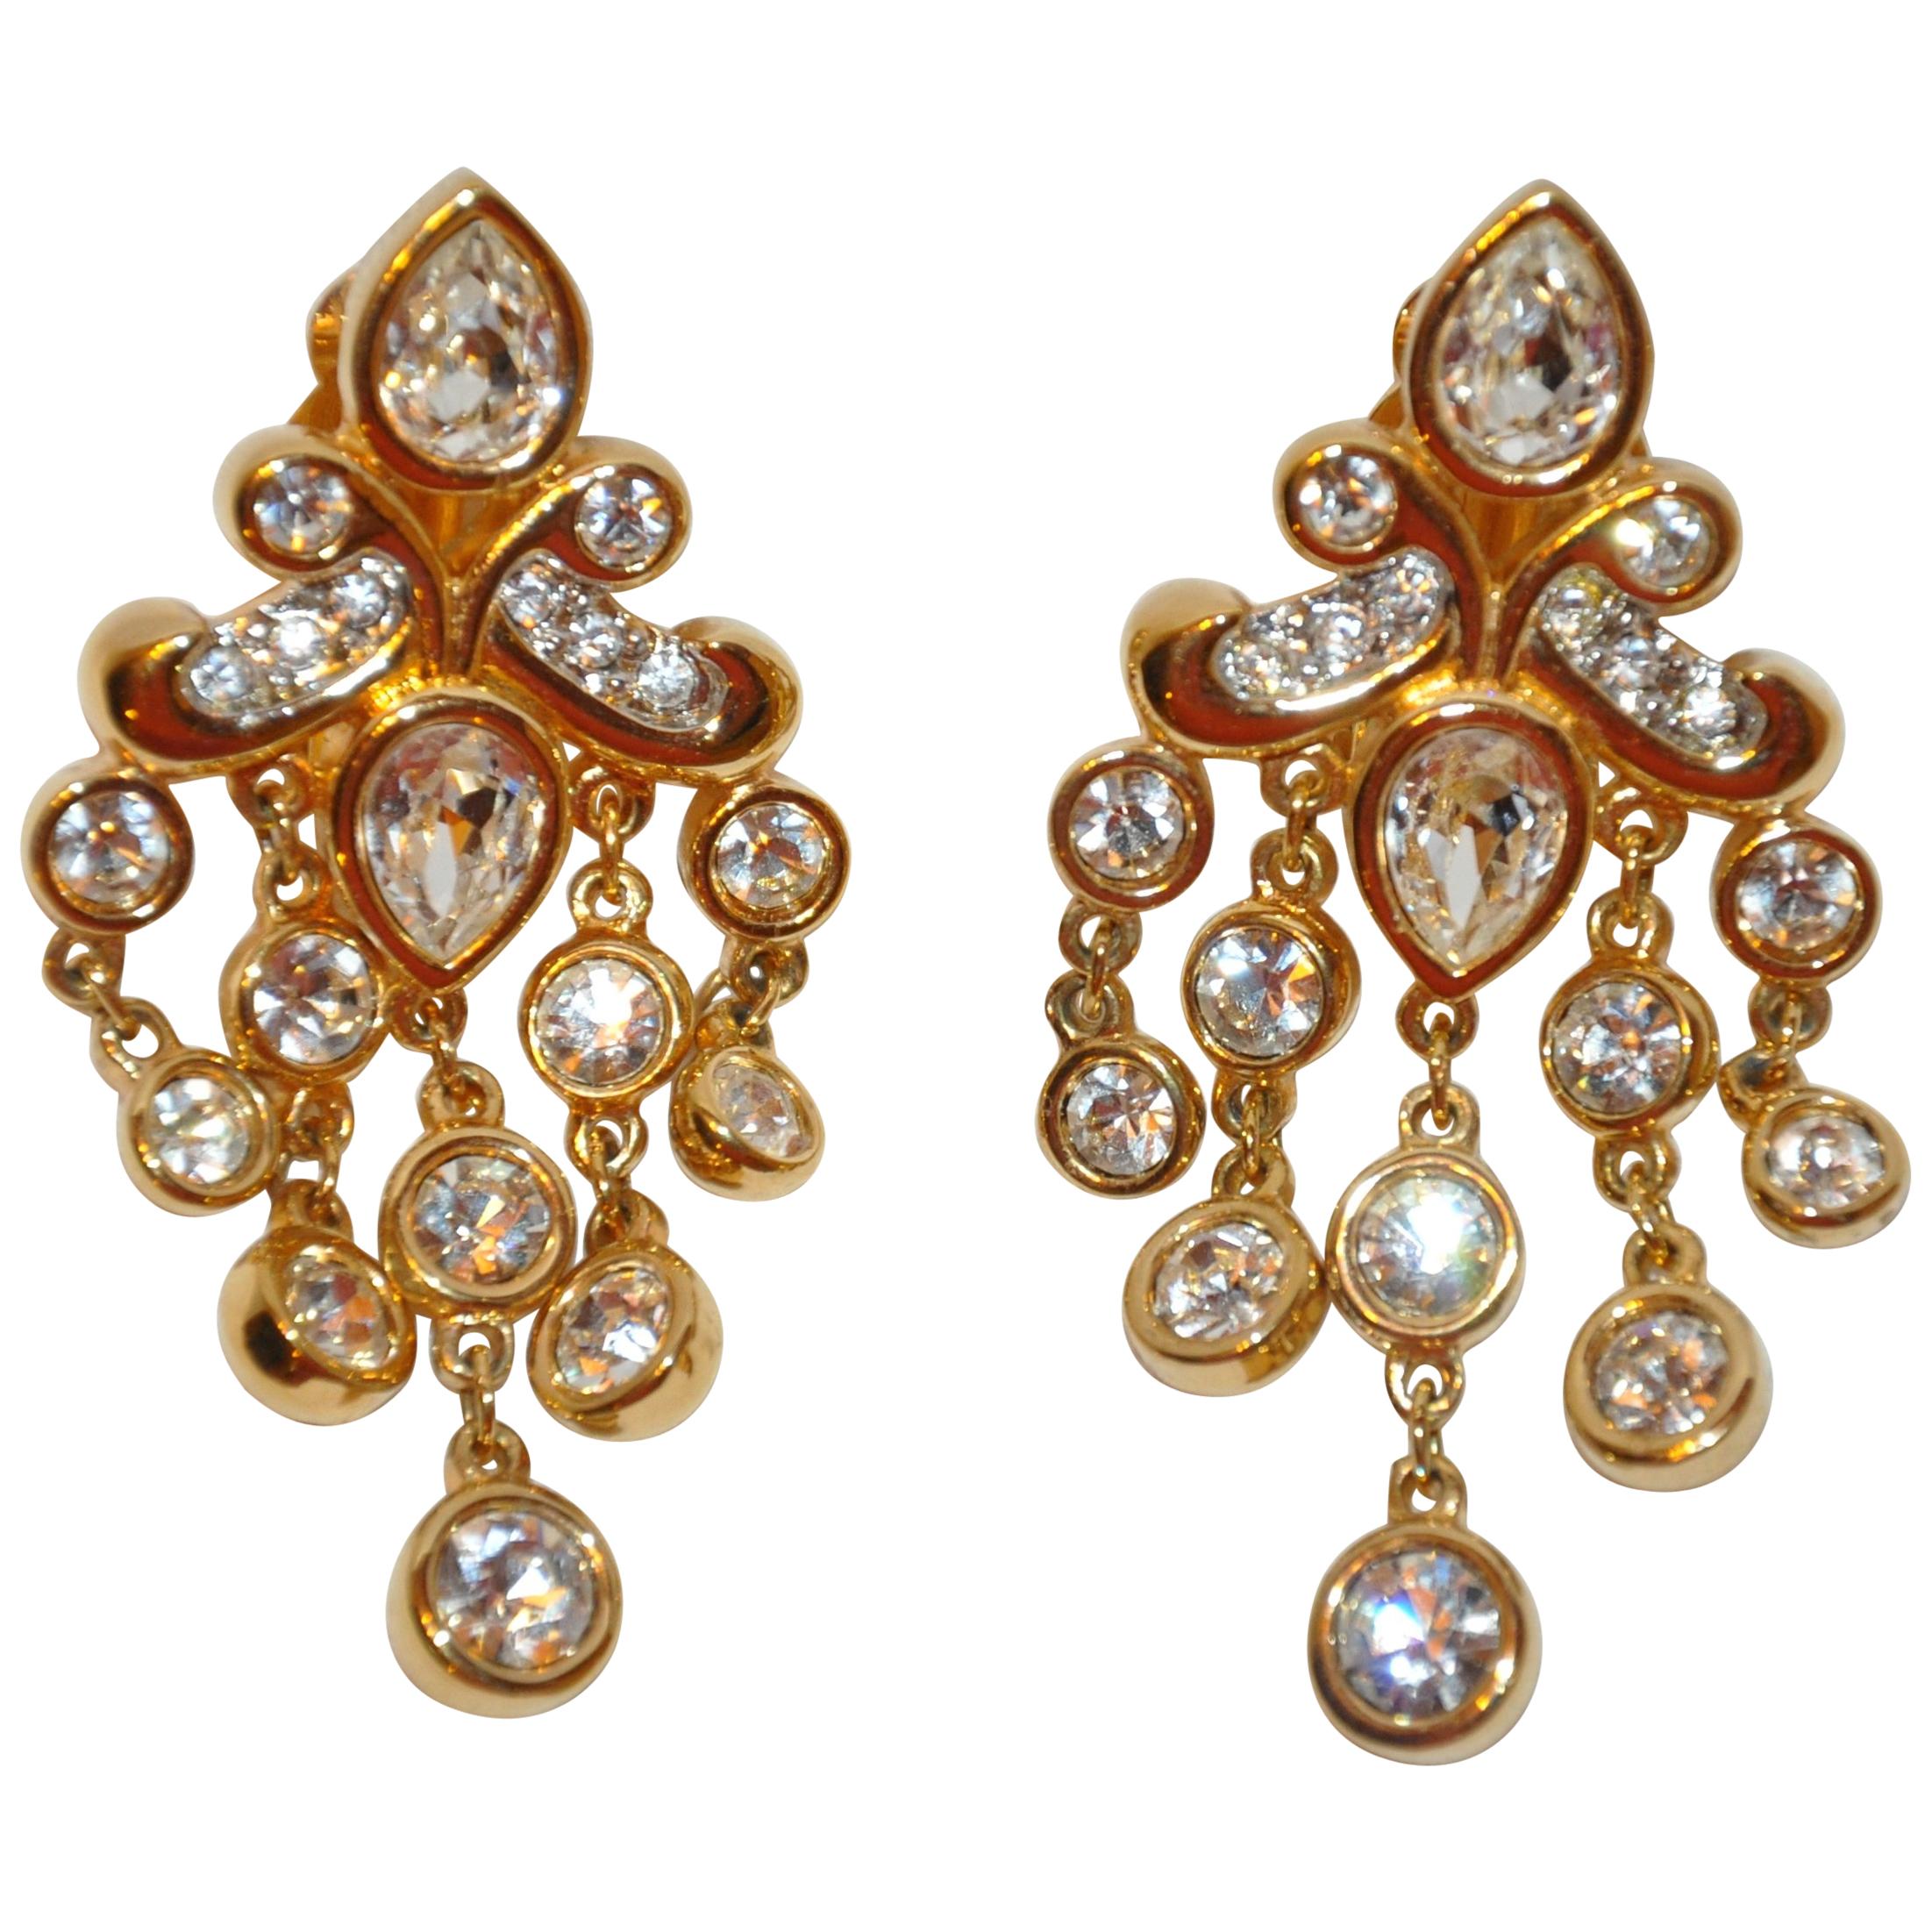 Polished Gilded Gold Vermeil Hardware "Chandelier" Earrings with Faux Diamonds